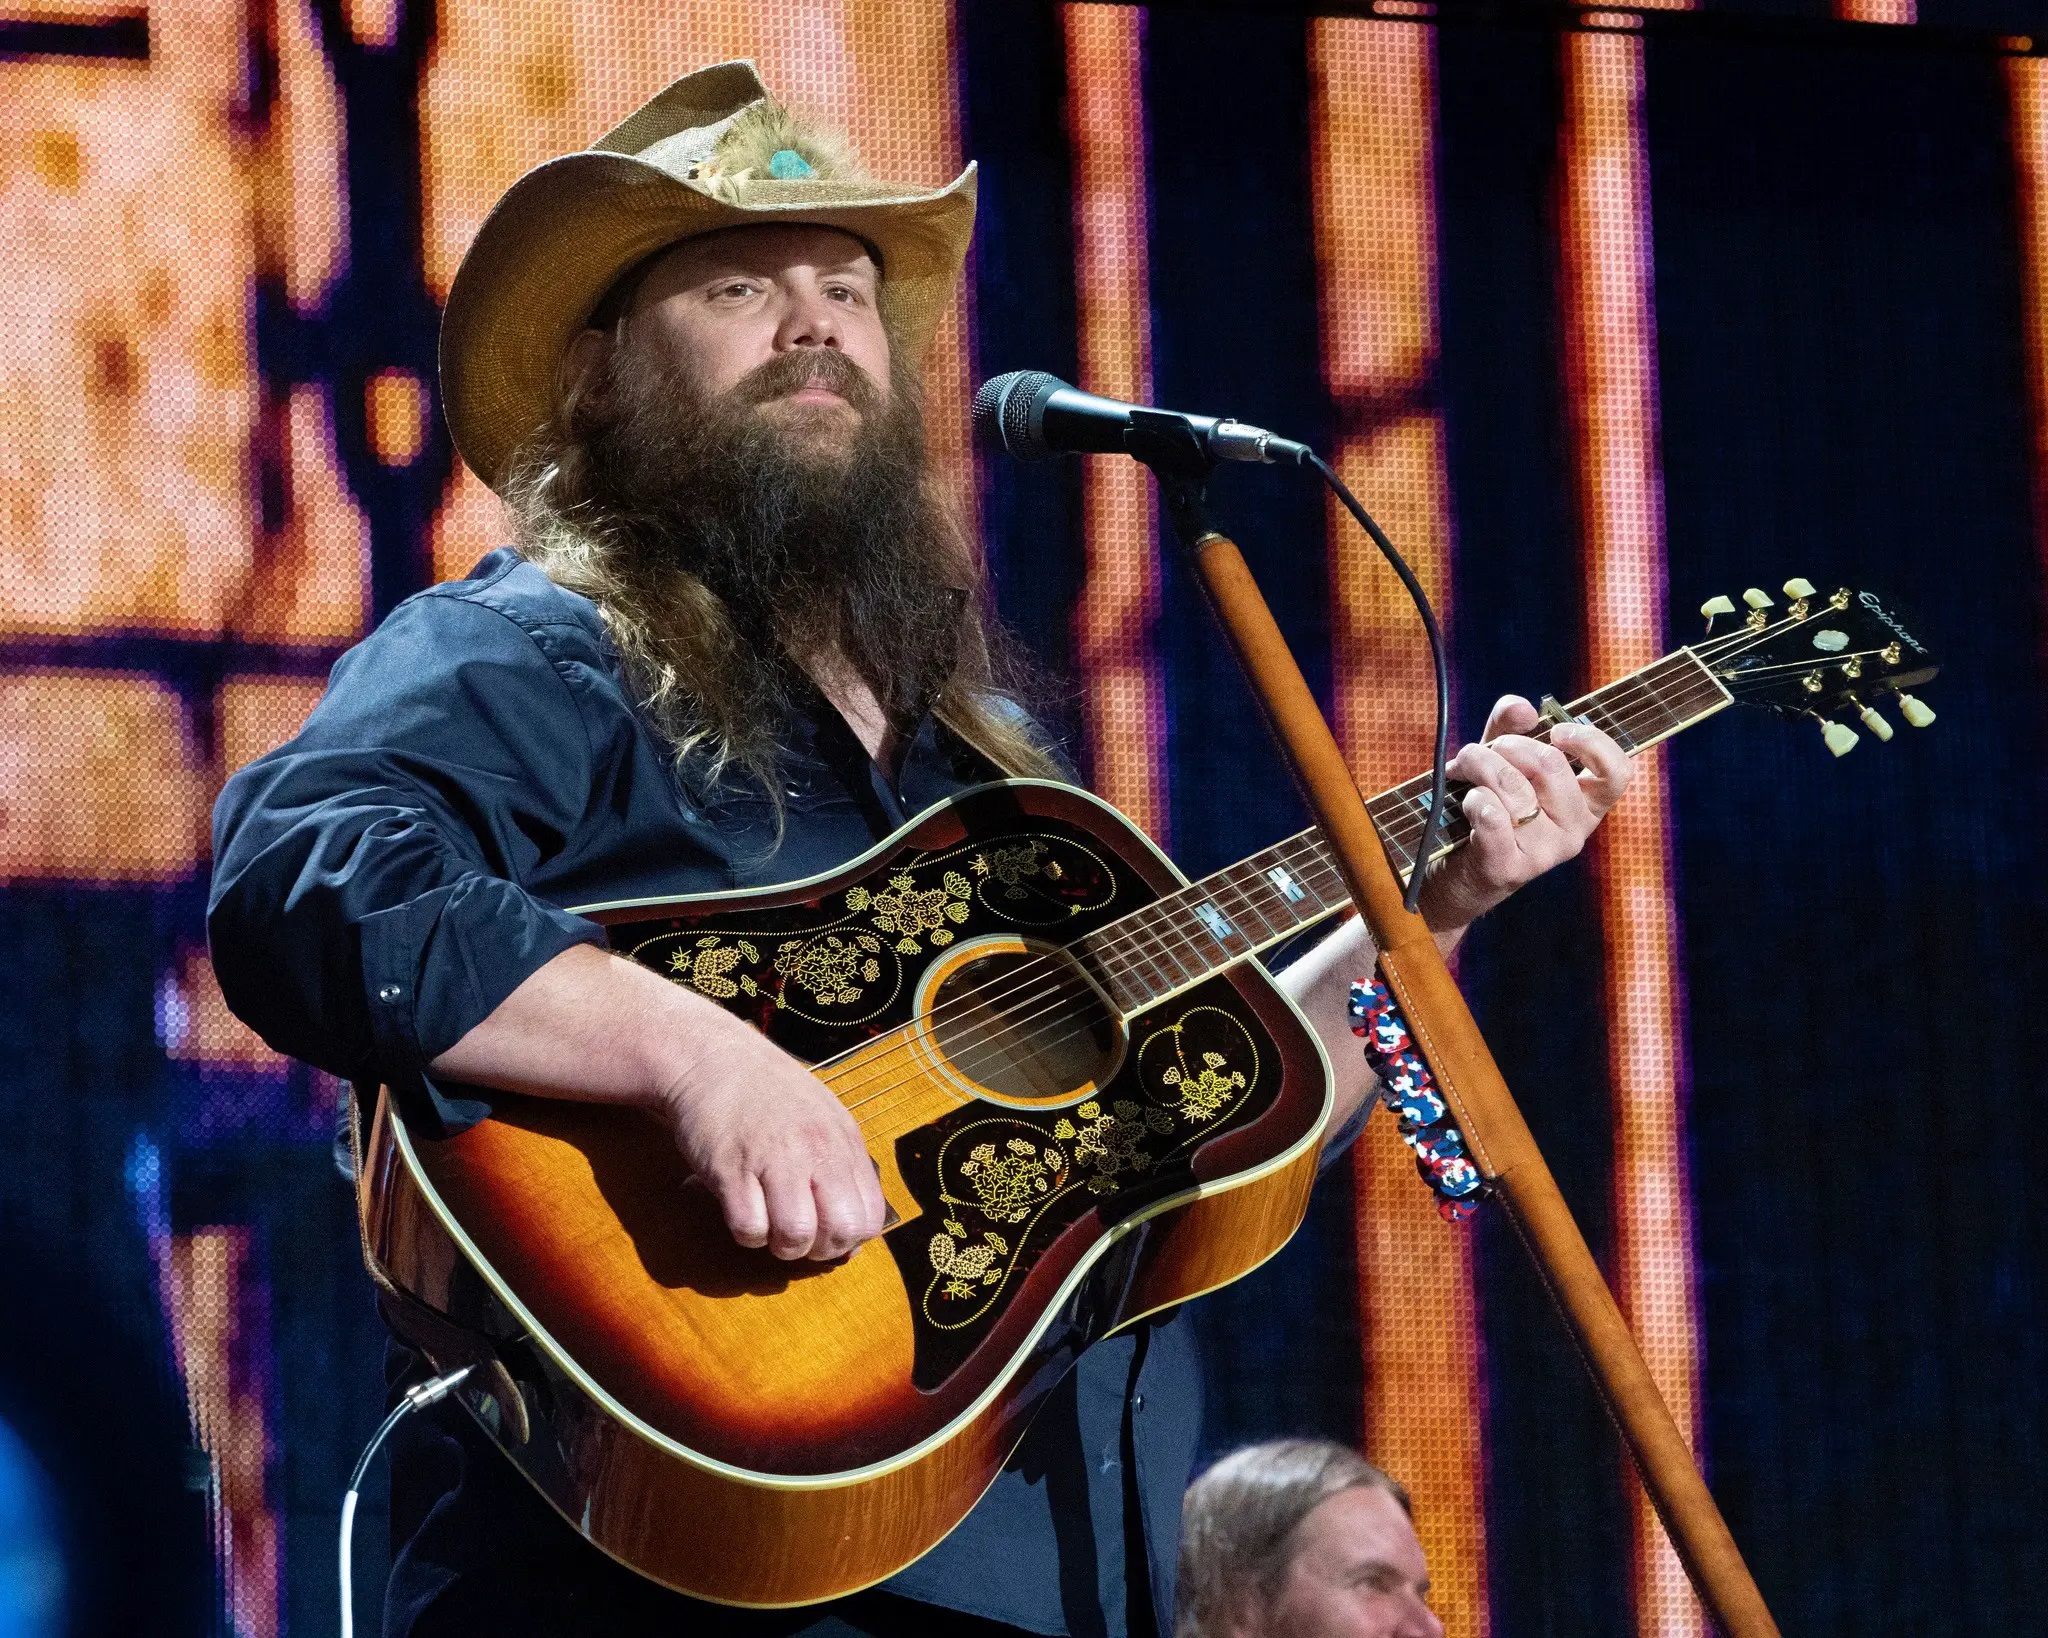 Chris Stapleton wins Entertainer of the Year at 2023 ACM Awards